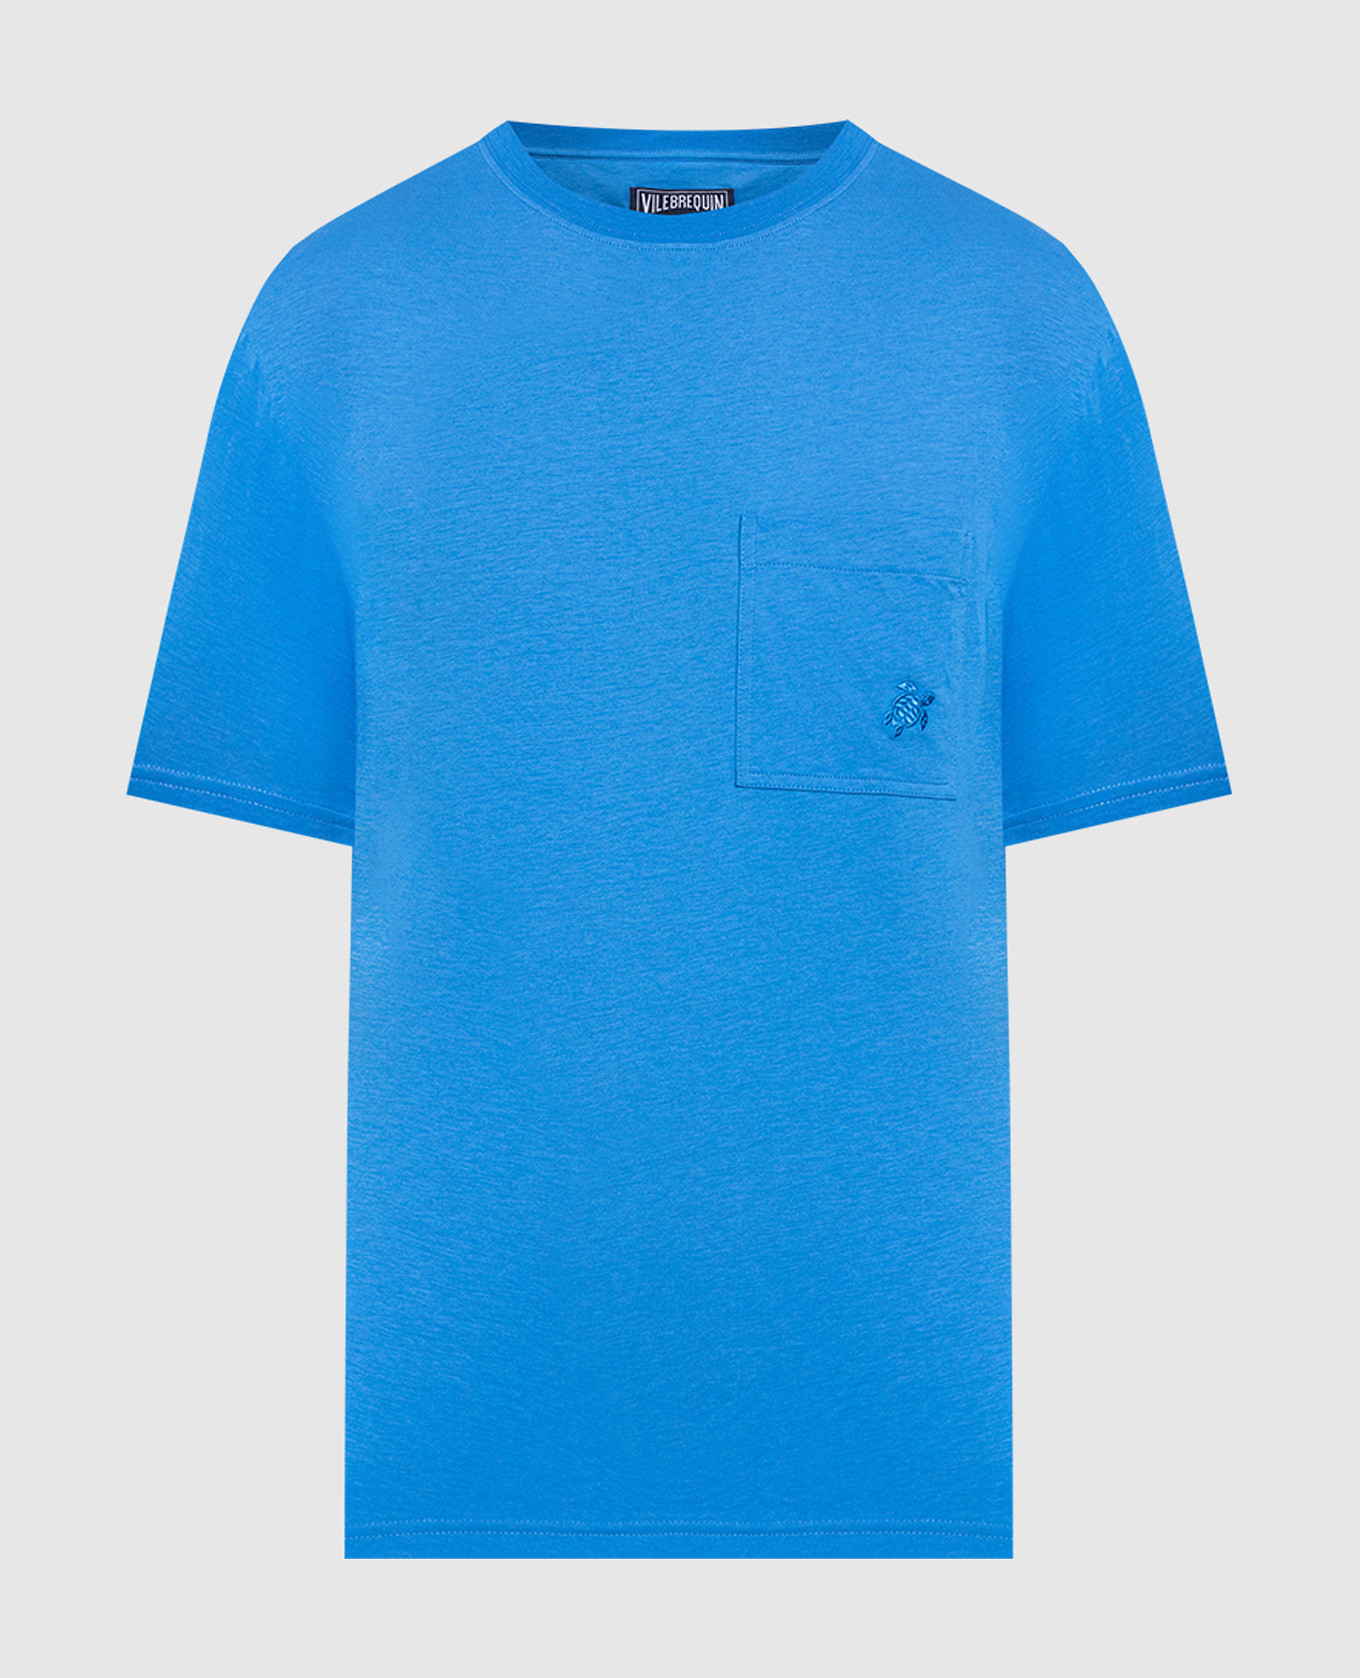 Mineral Dye blue t-shirt with logo embroidery